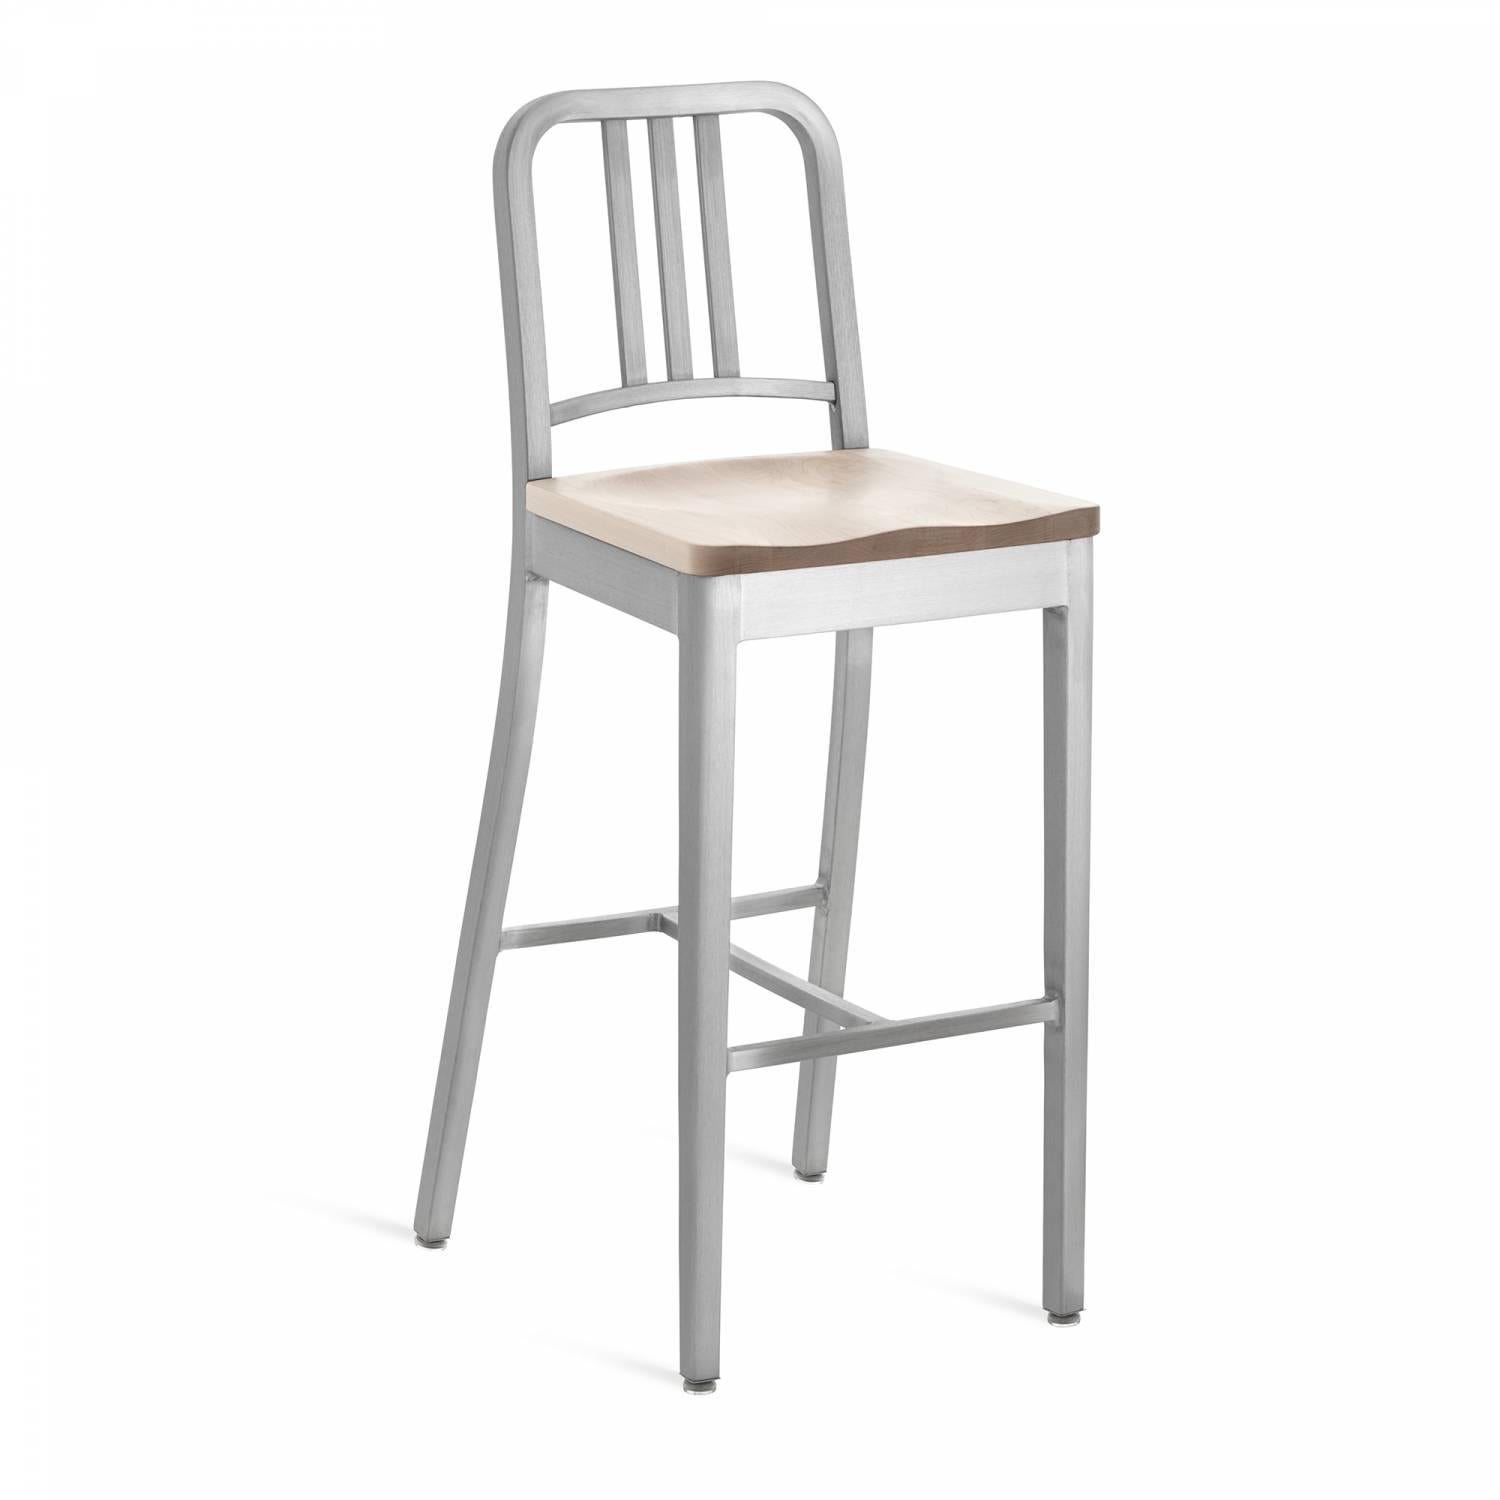 First built for use on submarines in 1944, the Navy Chair has been in continuous production ever since. With the famous 77 step Process, our craftsmen take soft, recycled aluminum, hand form and weld it- then temper it for strength. Finally, the